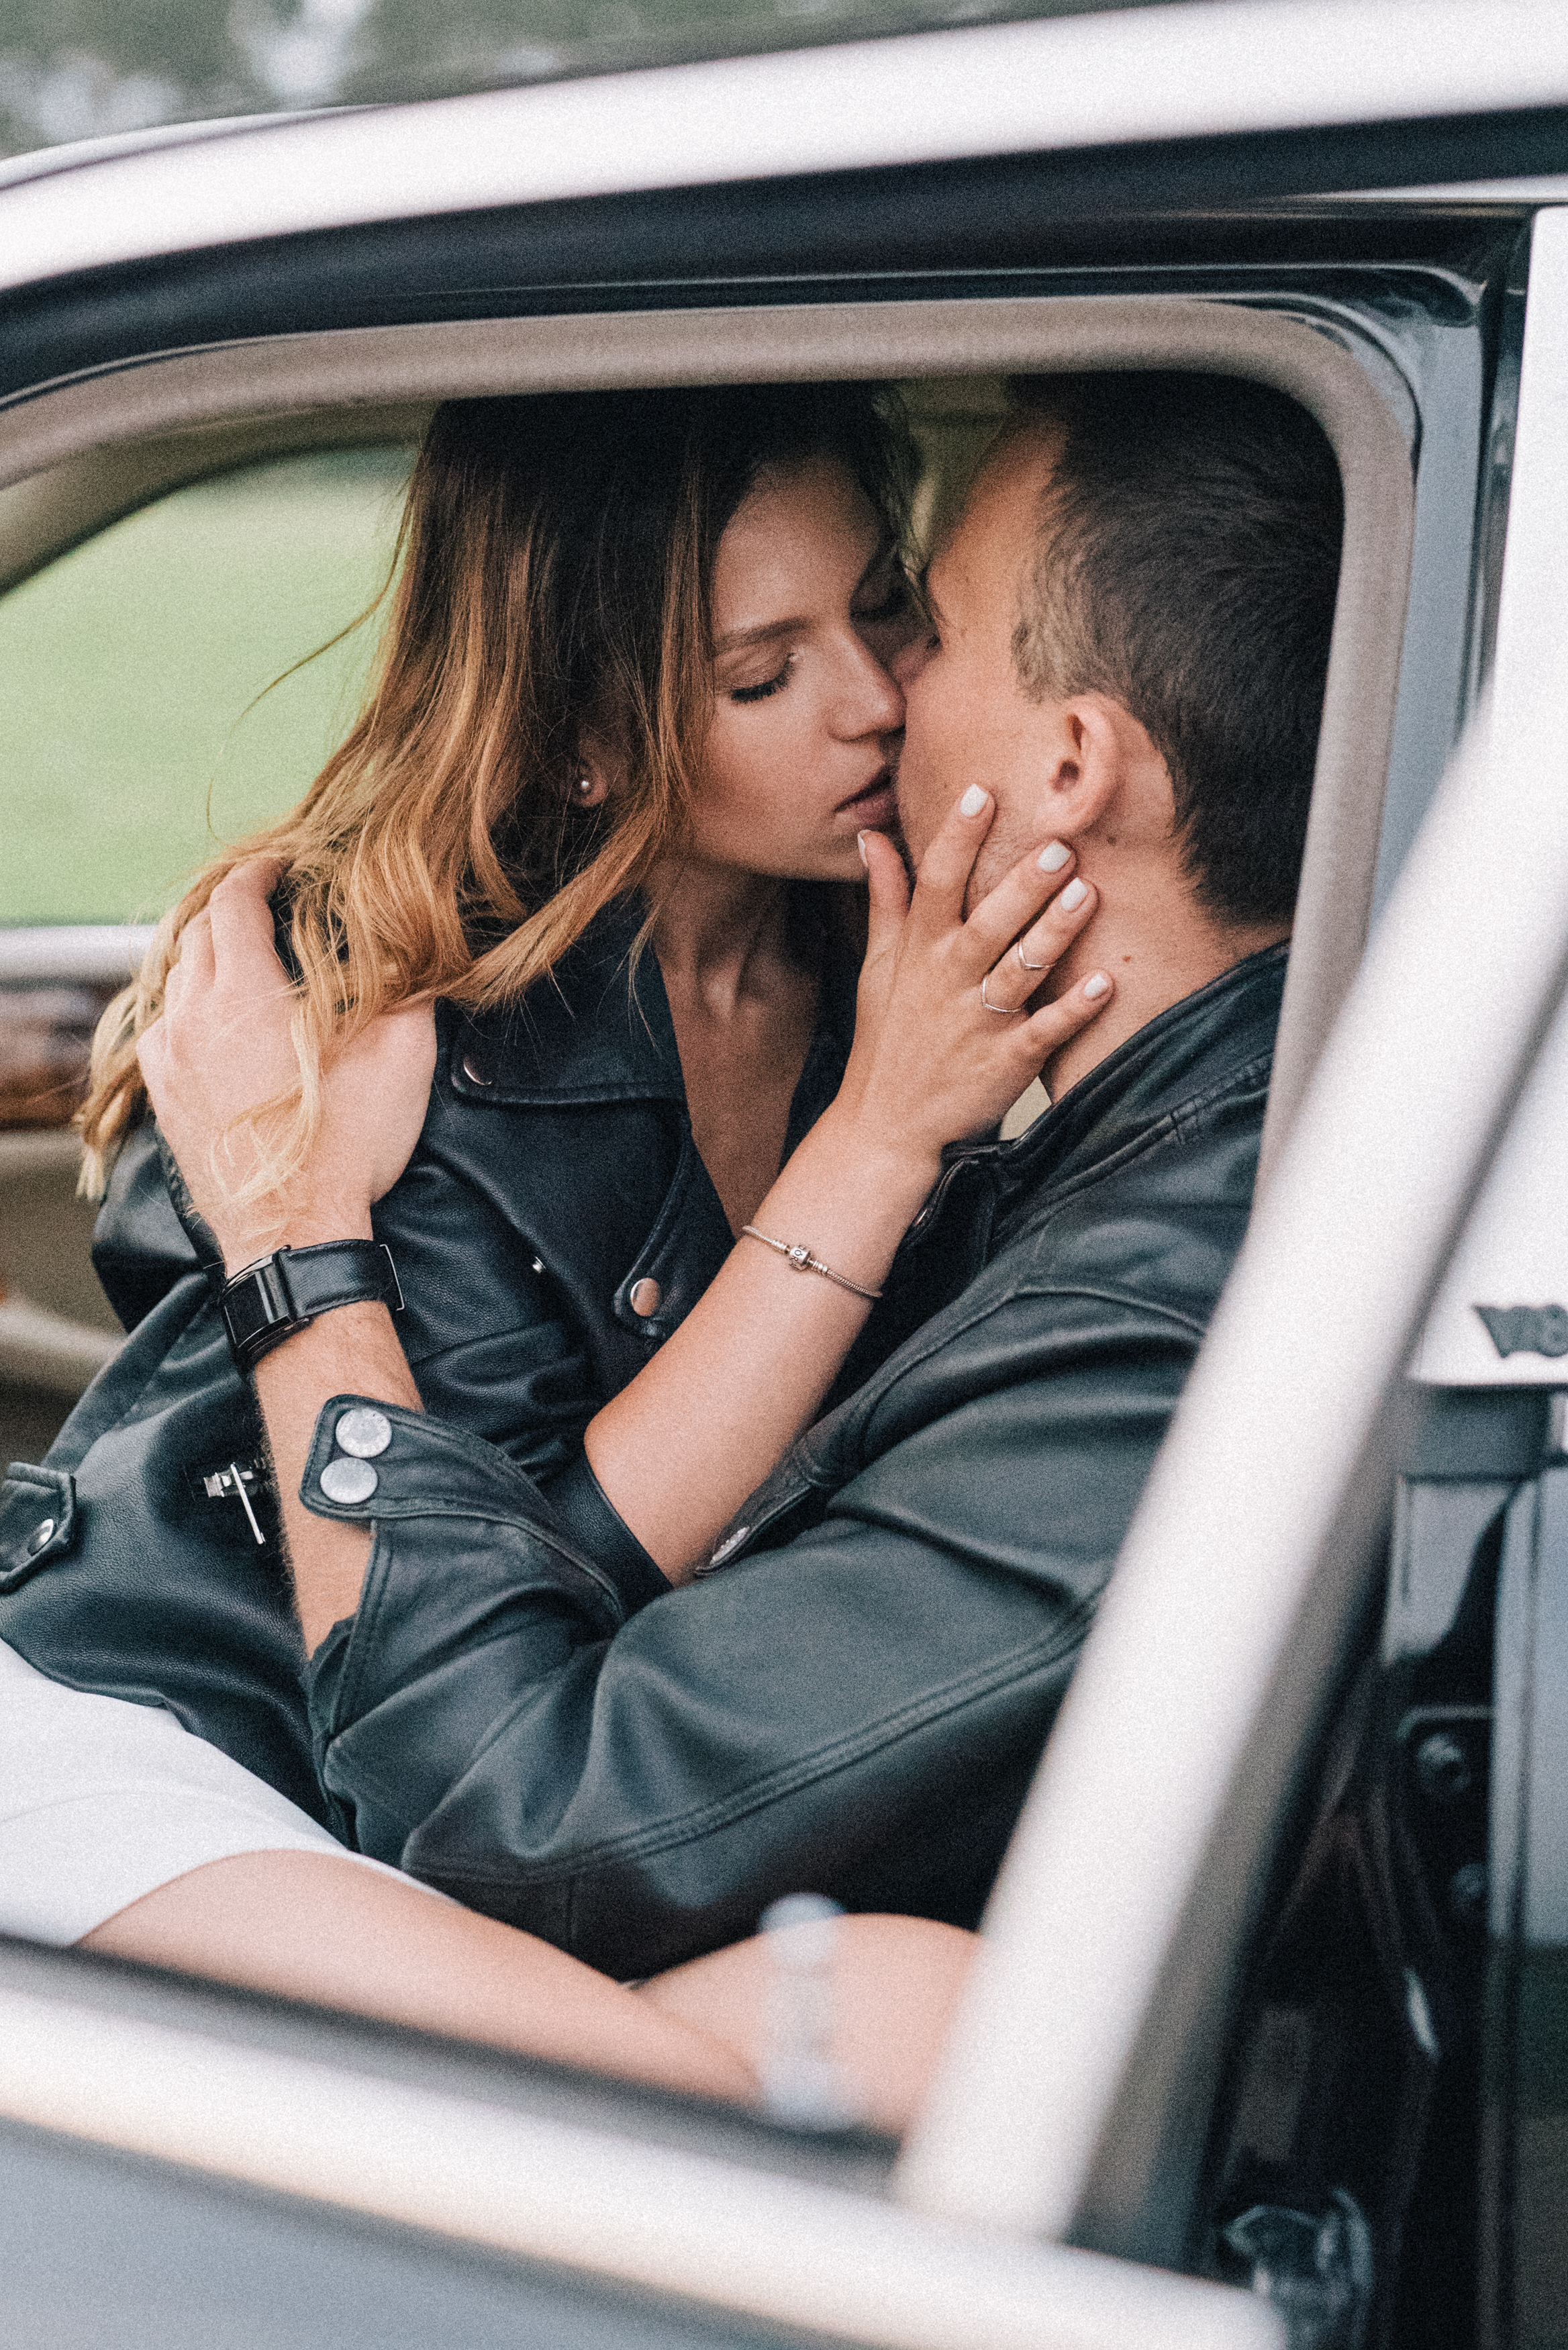 Man and Woman Kissing Inside a Car · Free